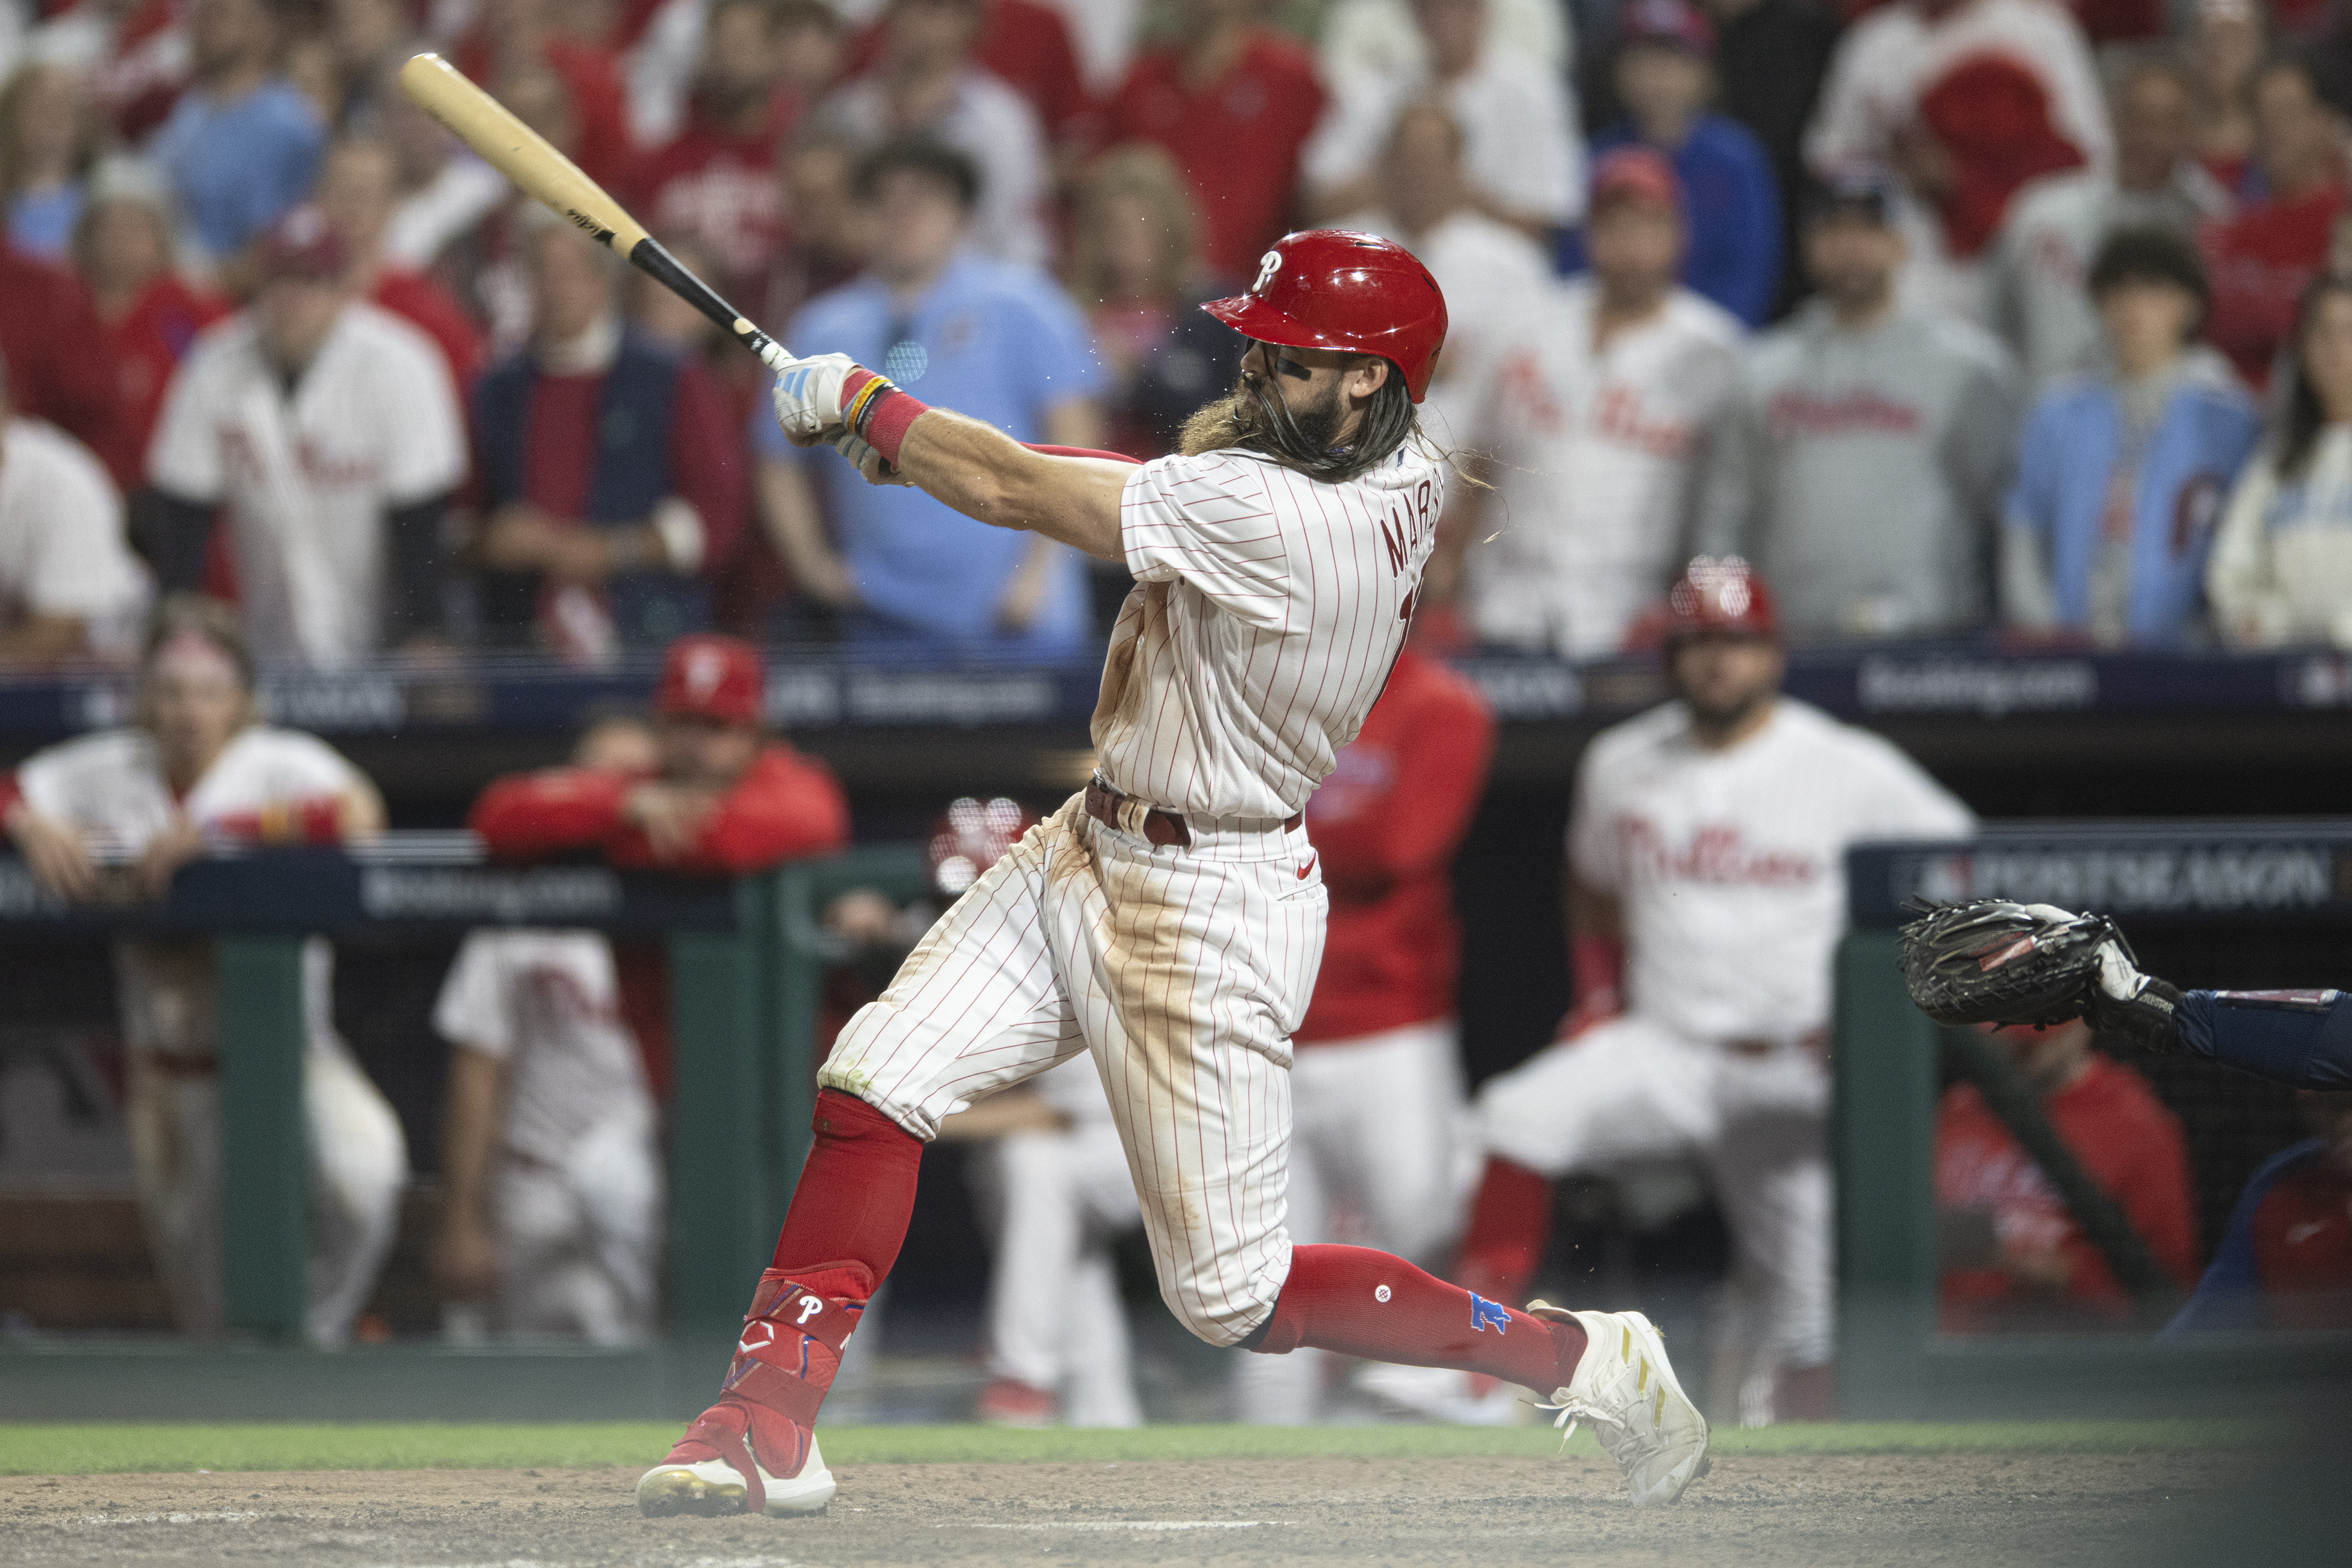 Attaboy! Bryce Harper adds to his legend with two homers, pushes